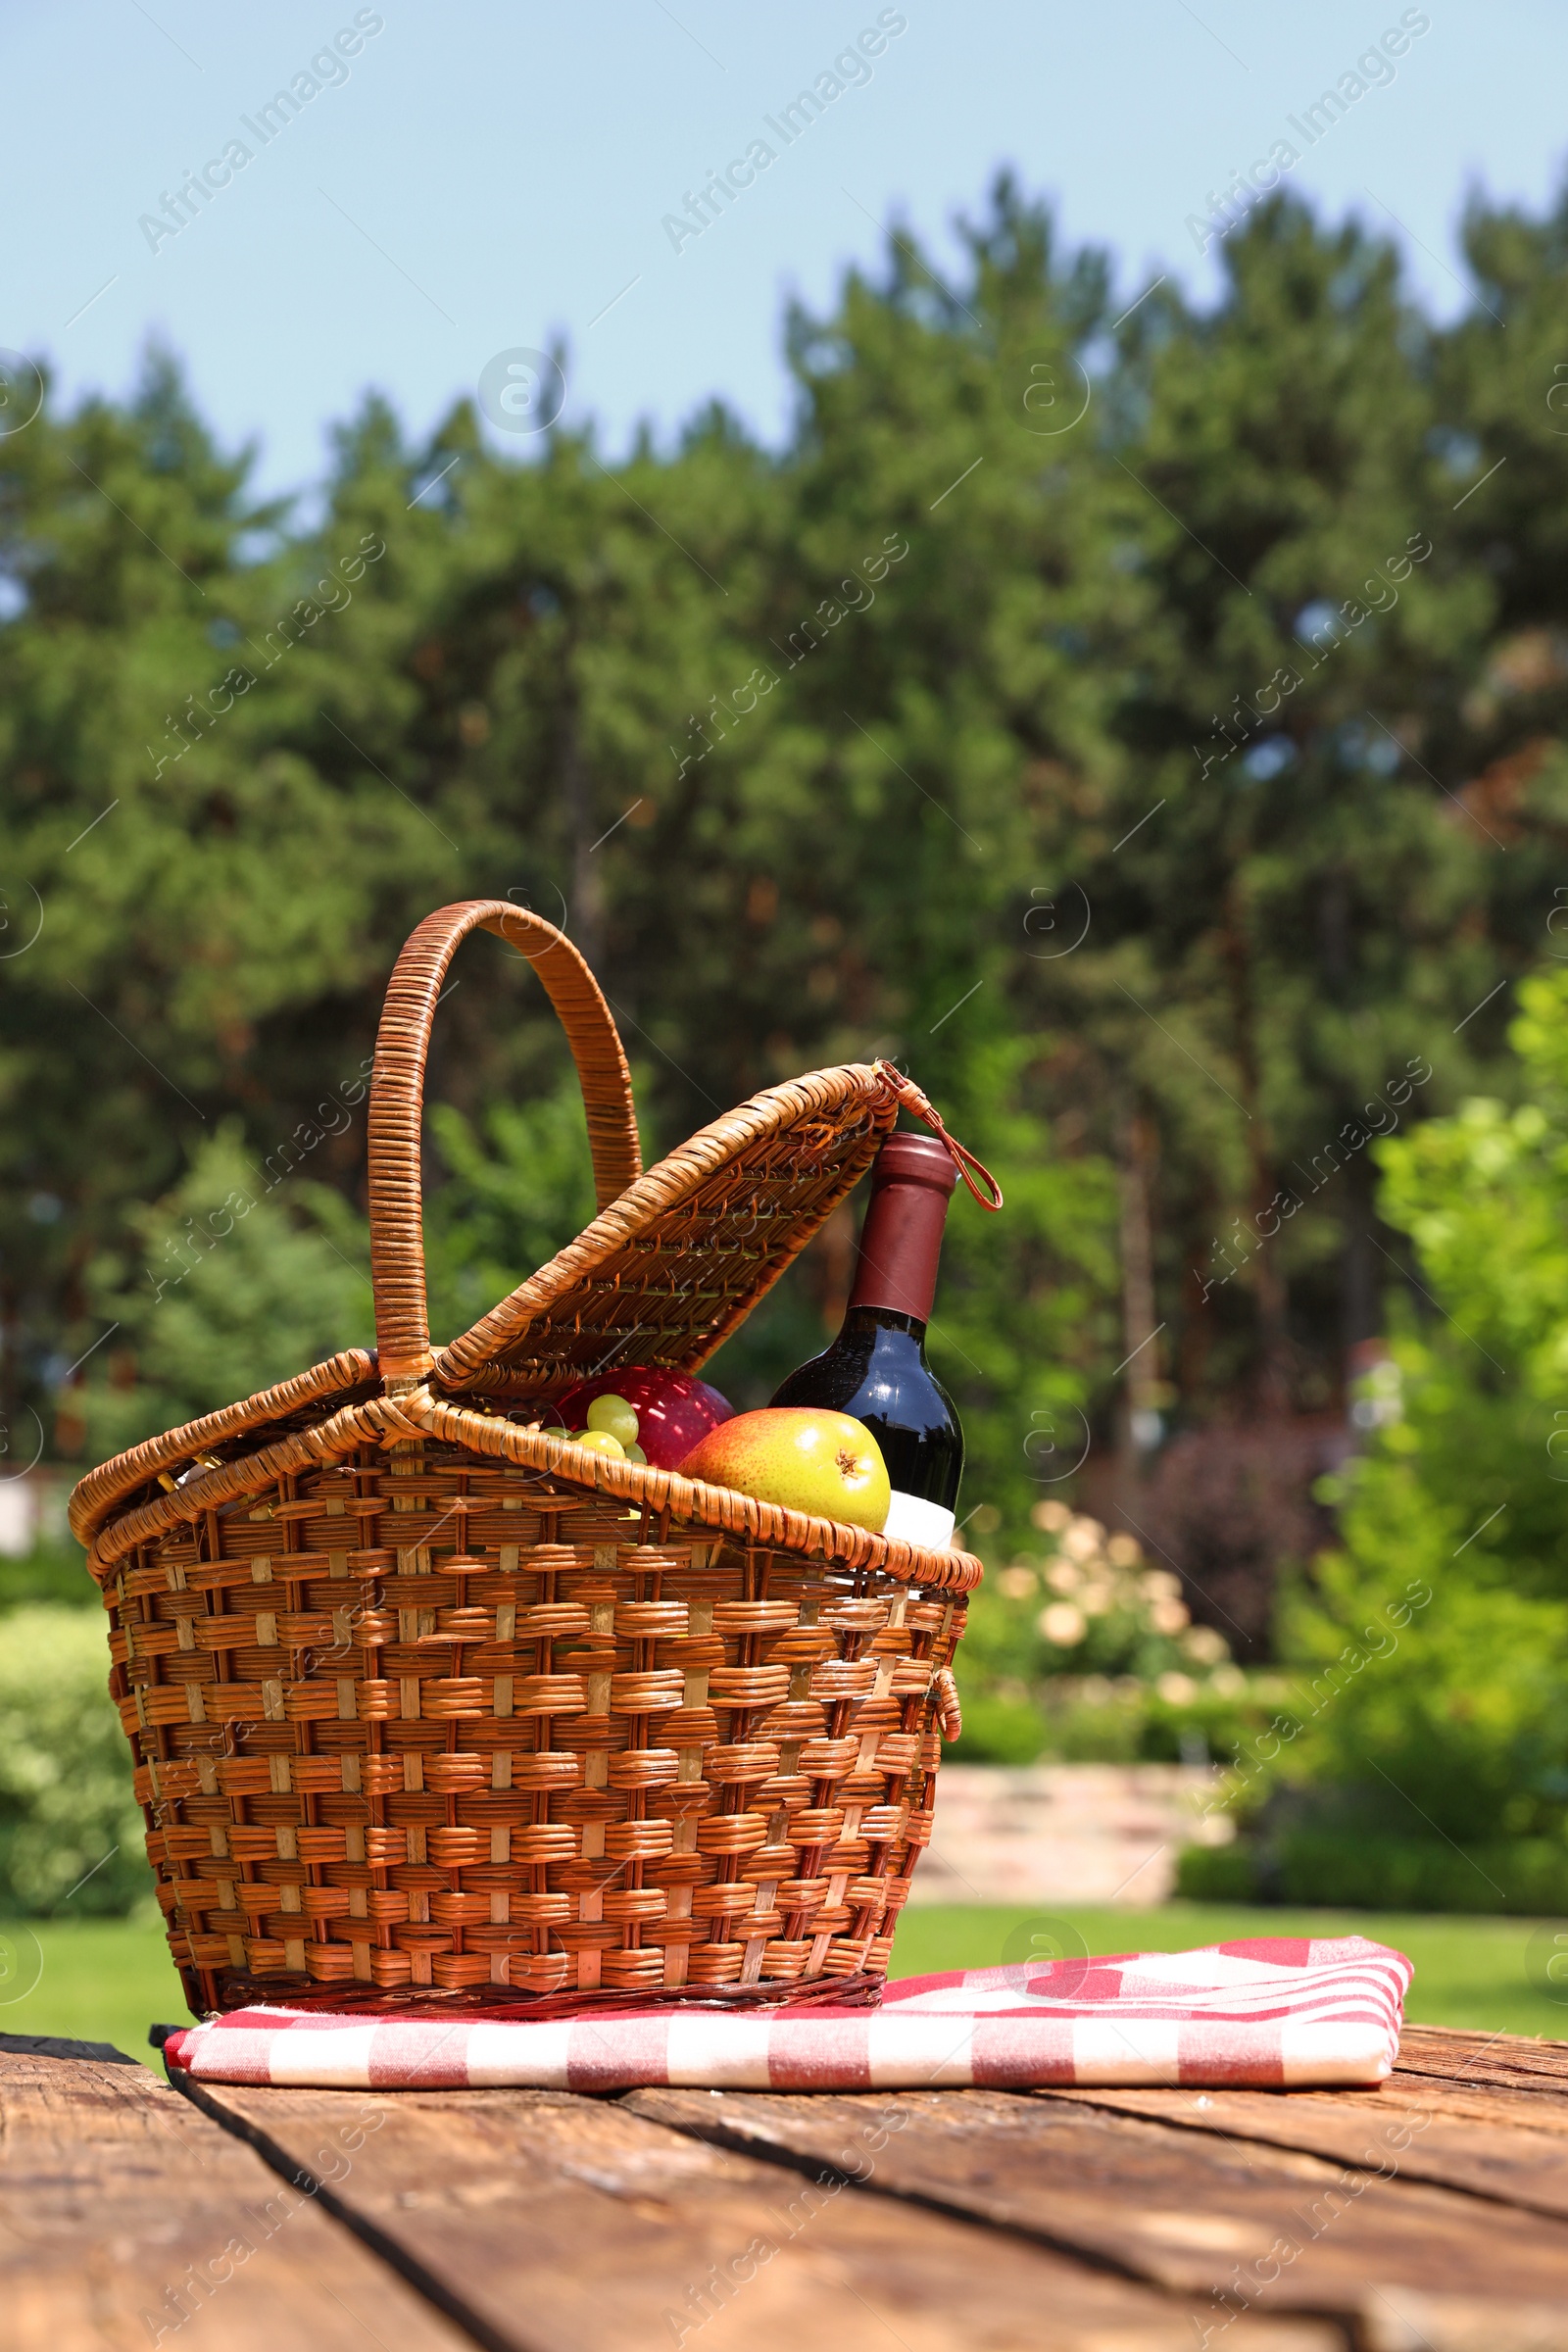 Photo of Picnic basket with fruits, bottle of wine and checkered blanket on wooden table in garden